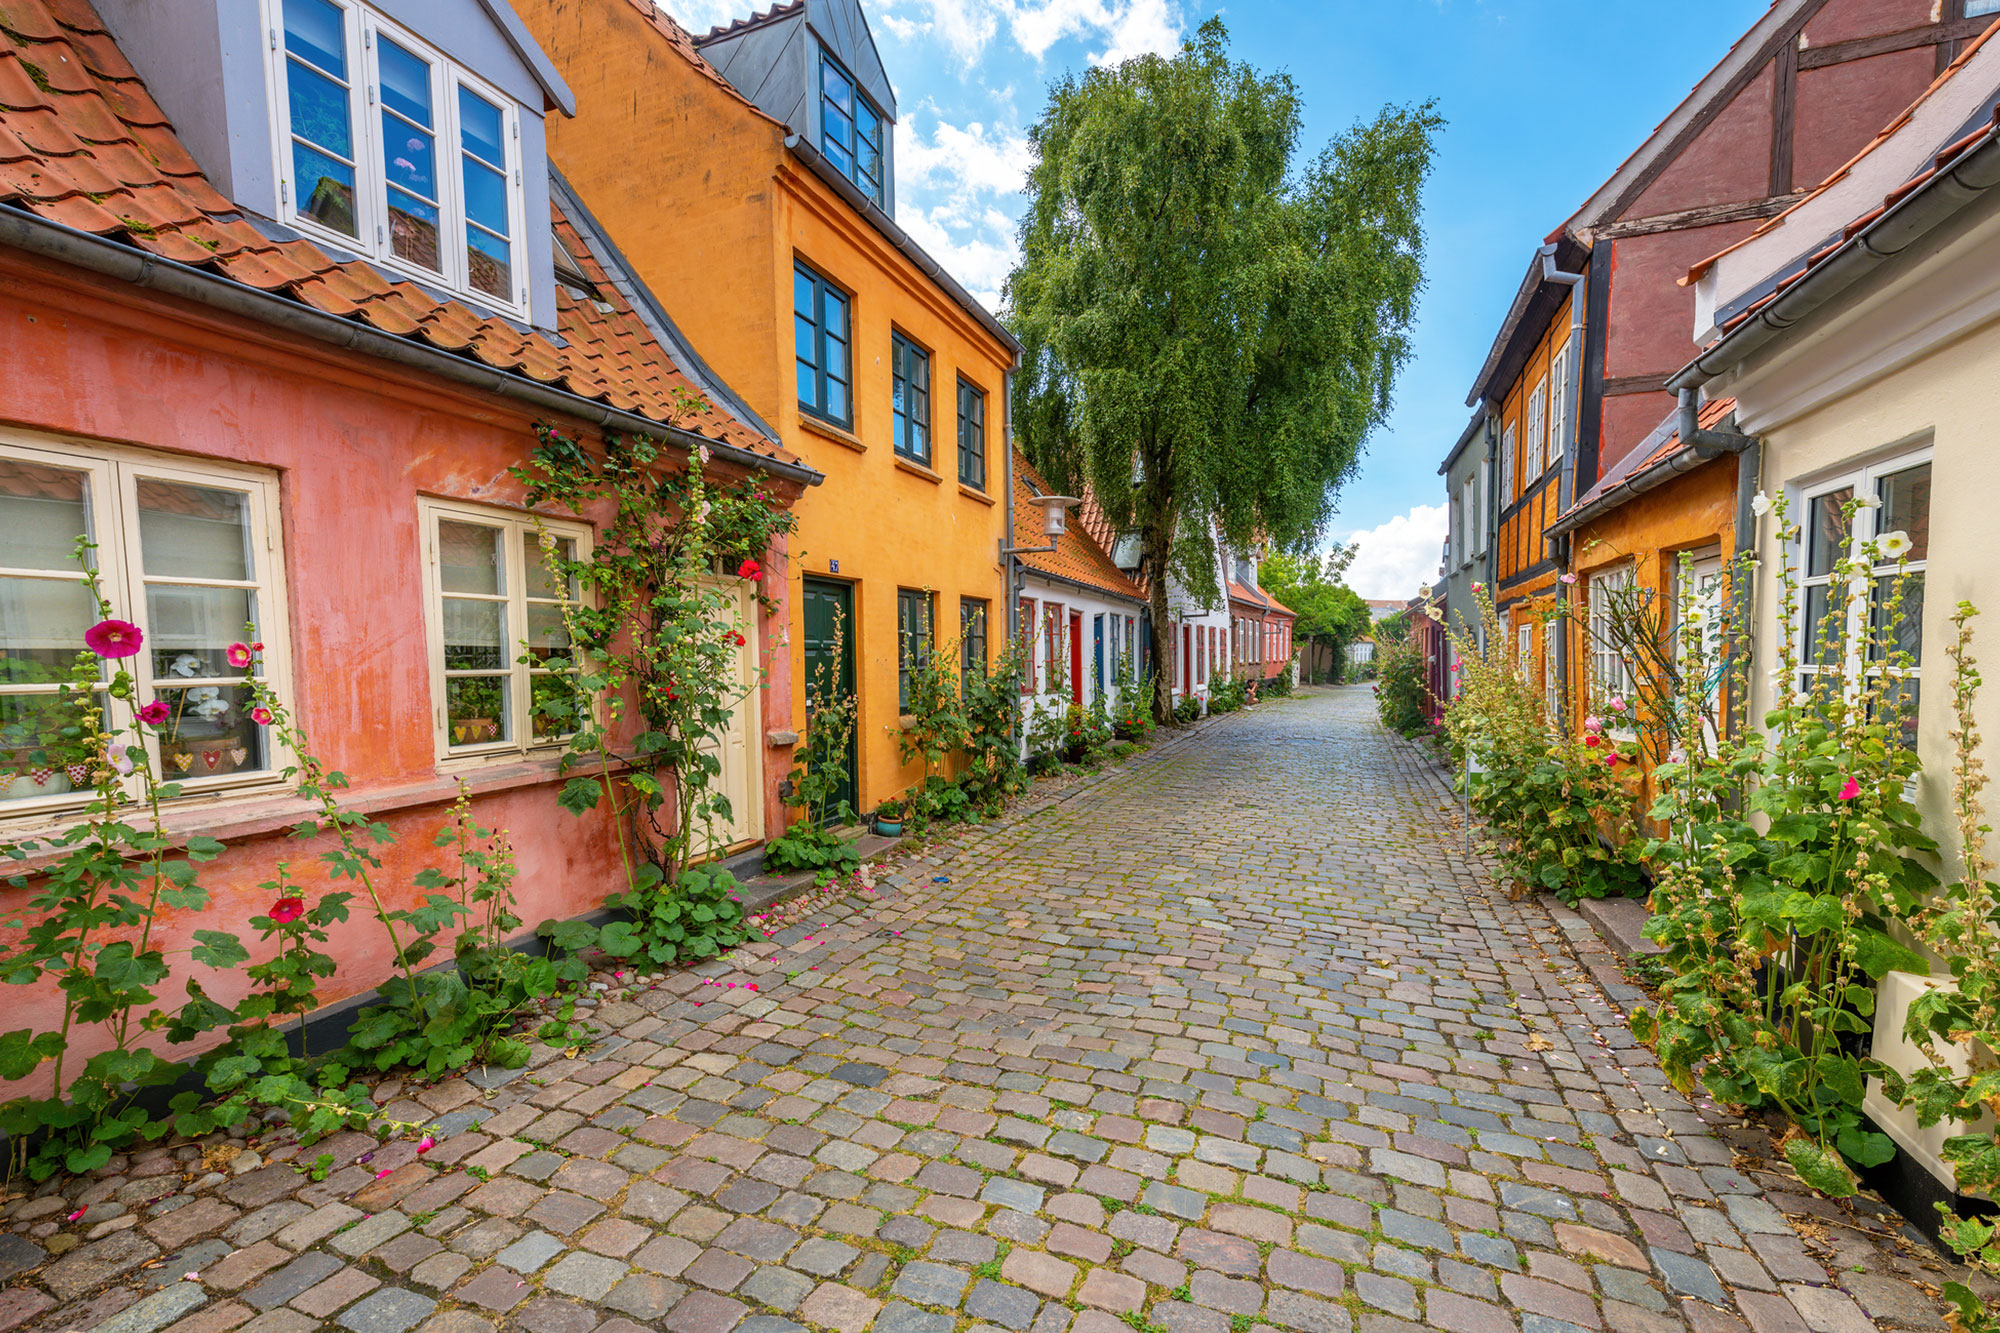 Quiet cobbled side street of brightly painted orange, white, and pink houses in Aarhus, Denmark